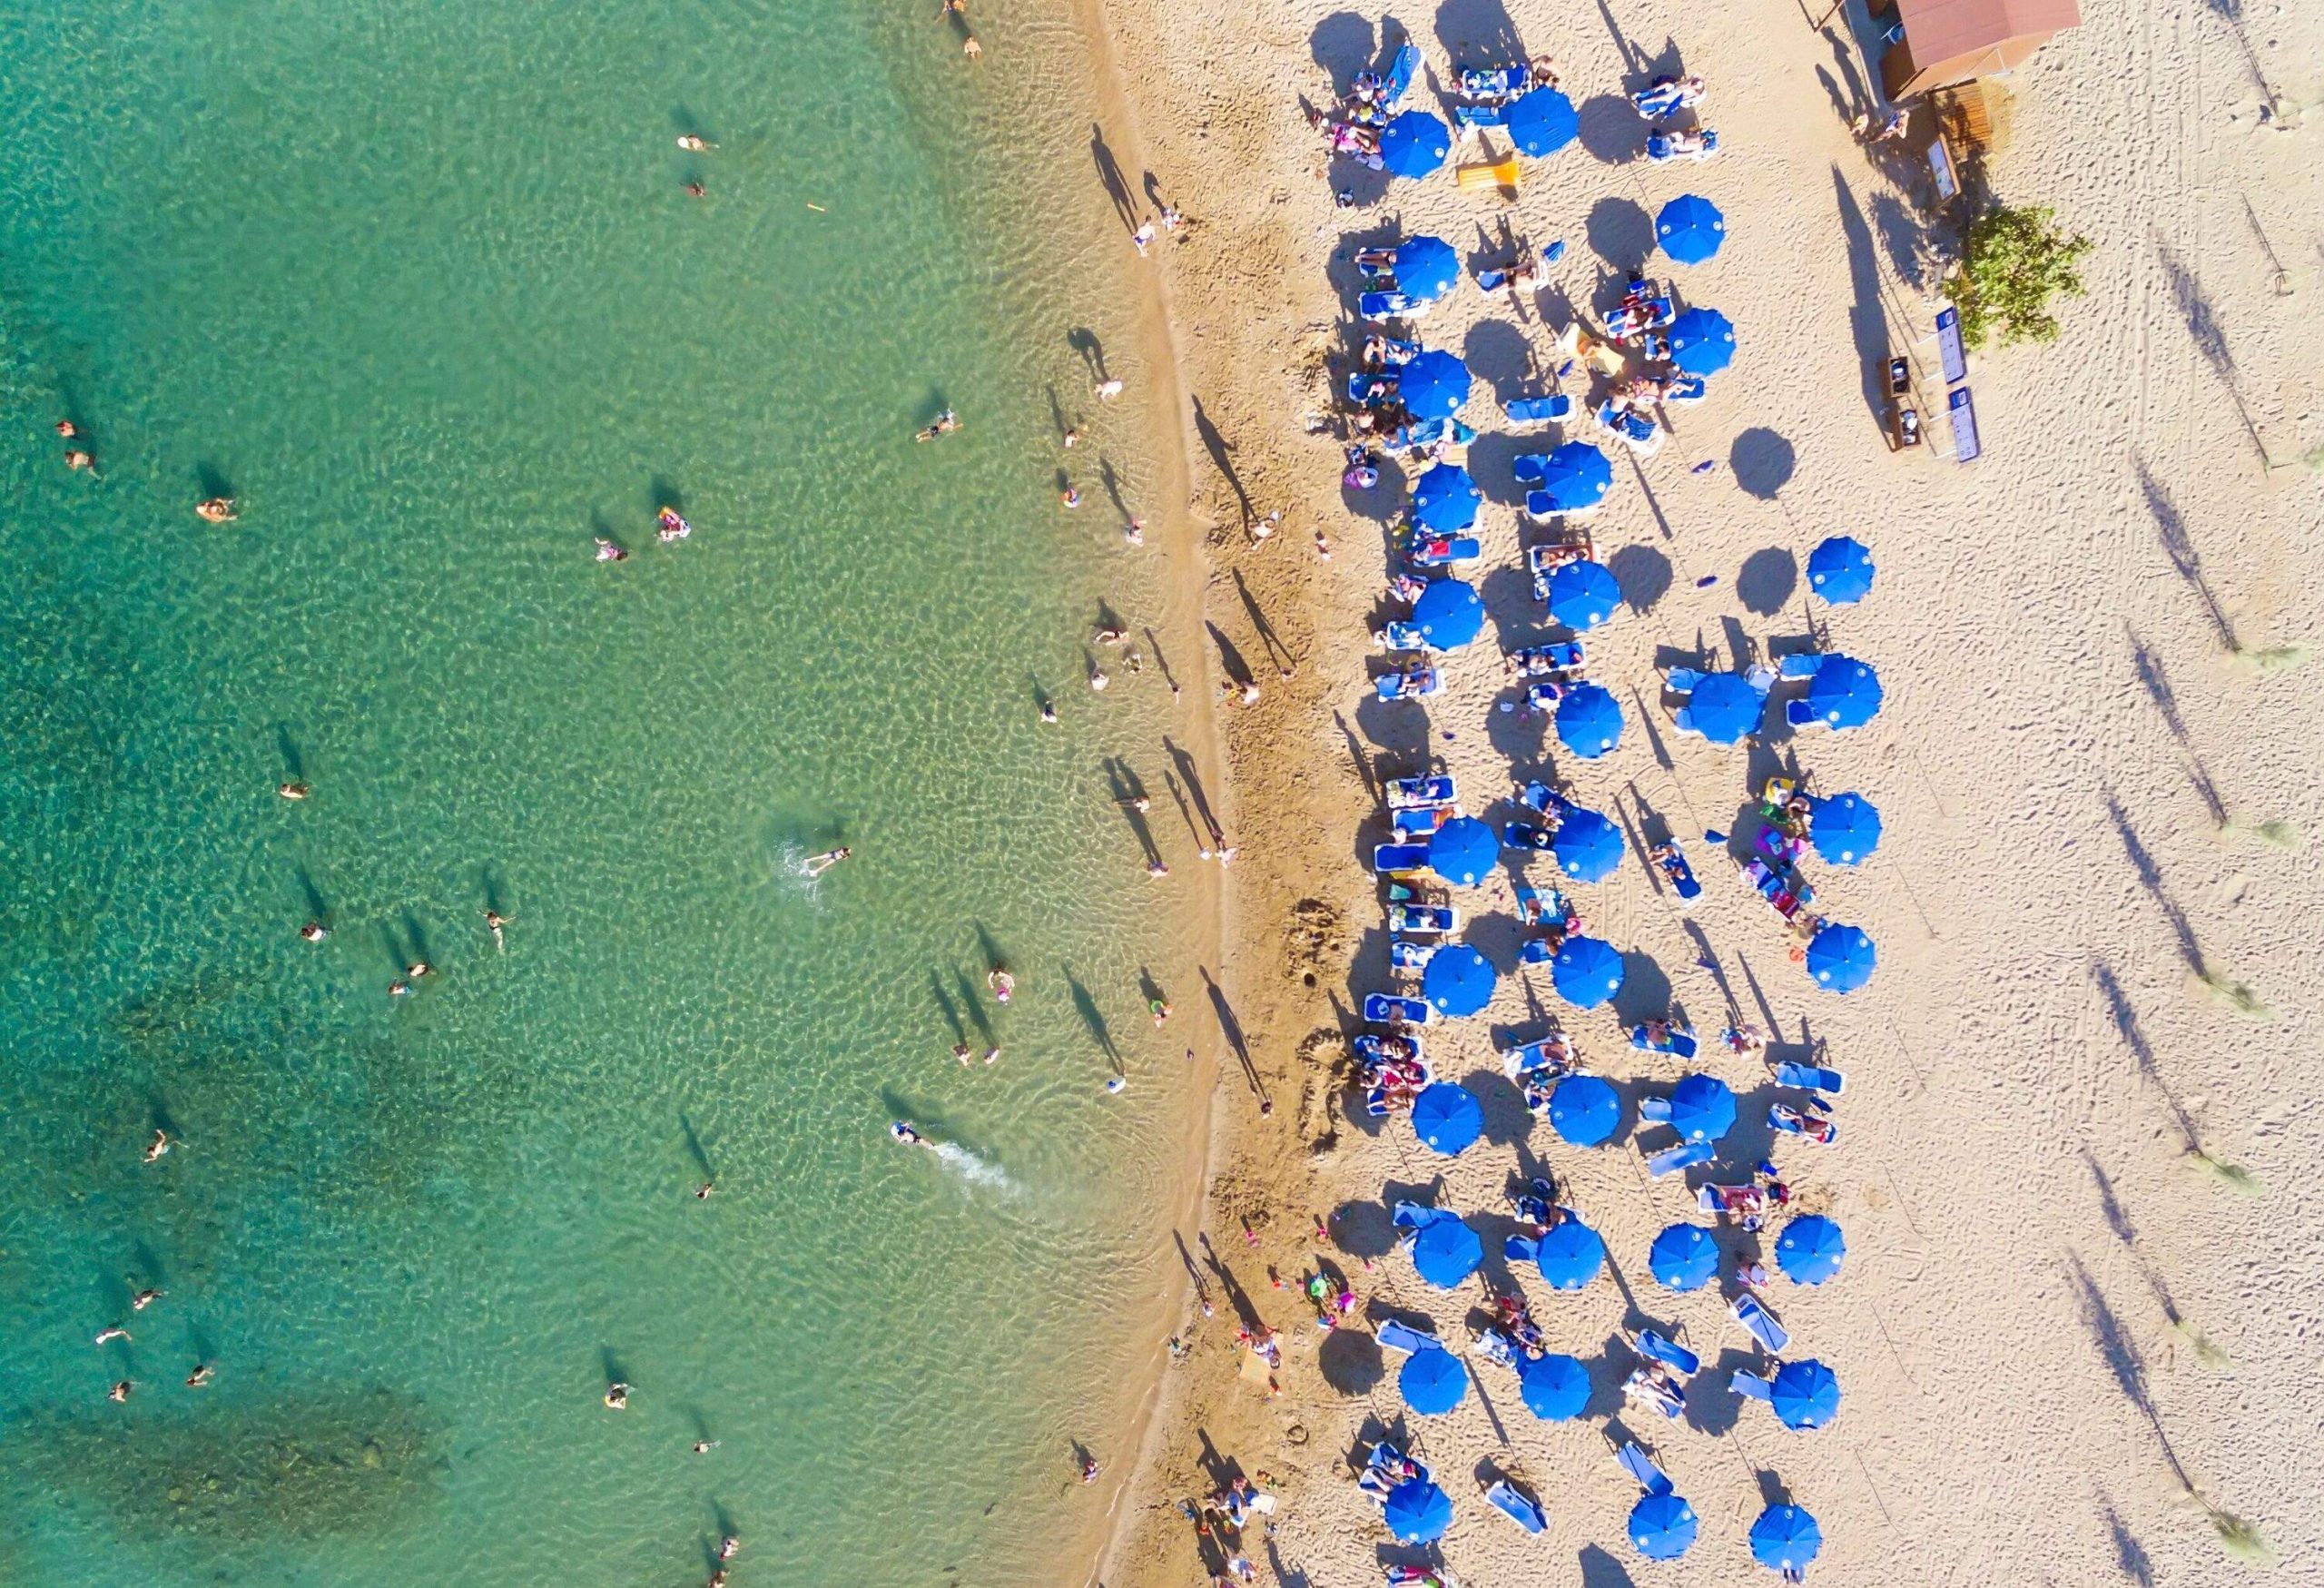 People swimming in an emerald sea with blue umbrellas set on the beach.